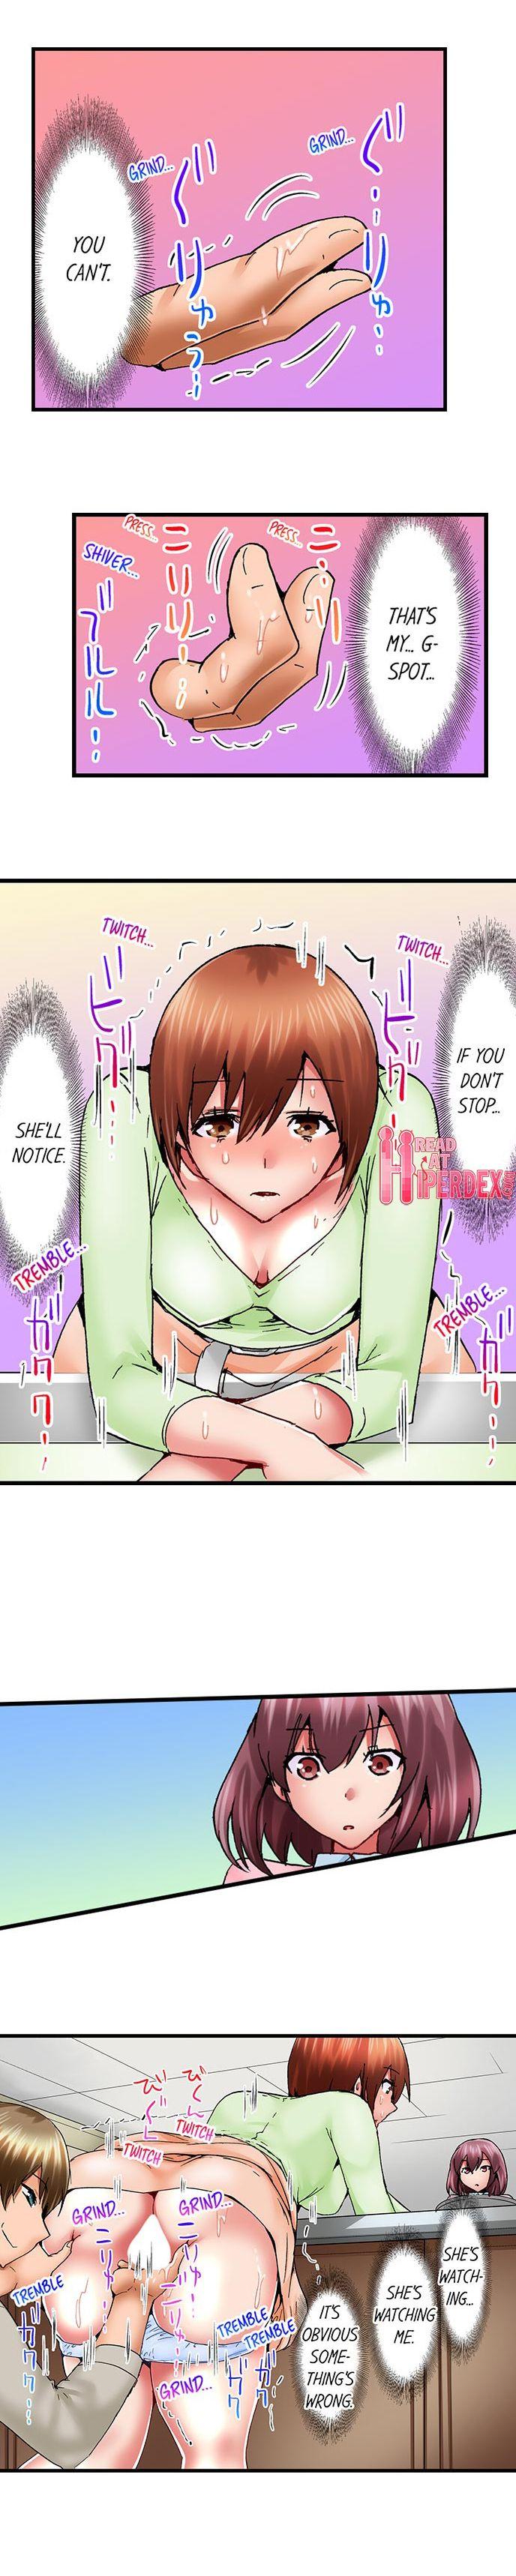 Delicia Hidden Under My Daughter’s Bed During Sex Ch. 8 -english Putaria - Page 3